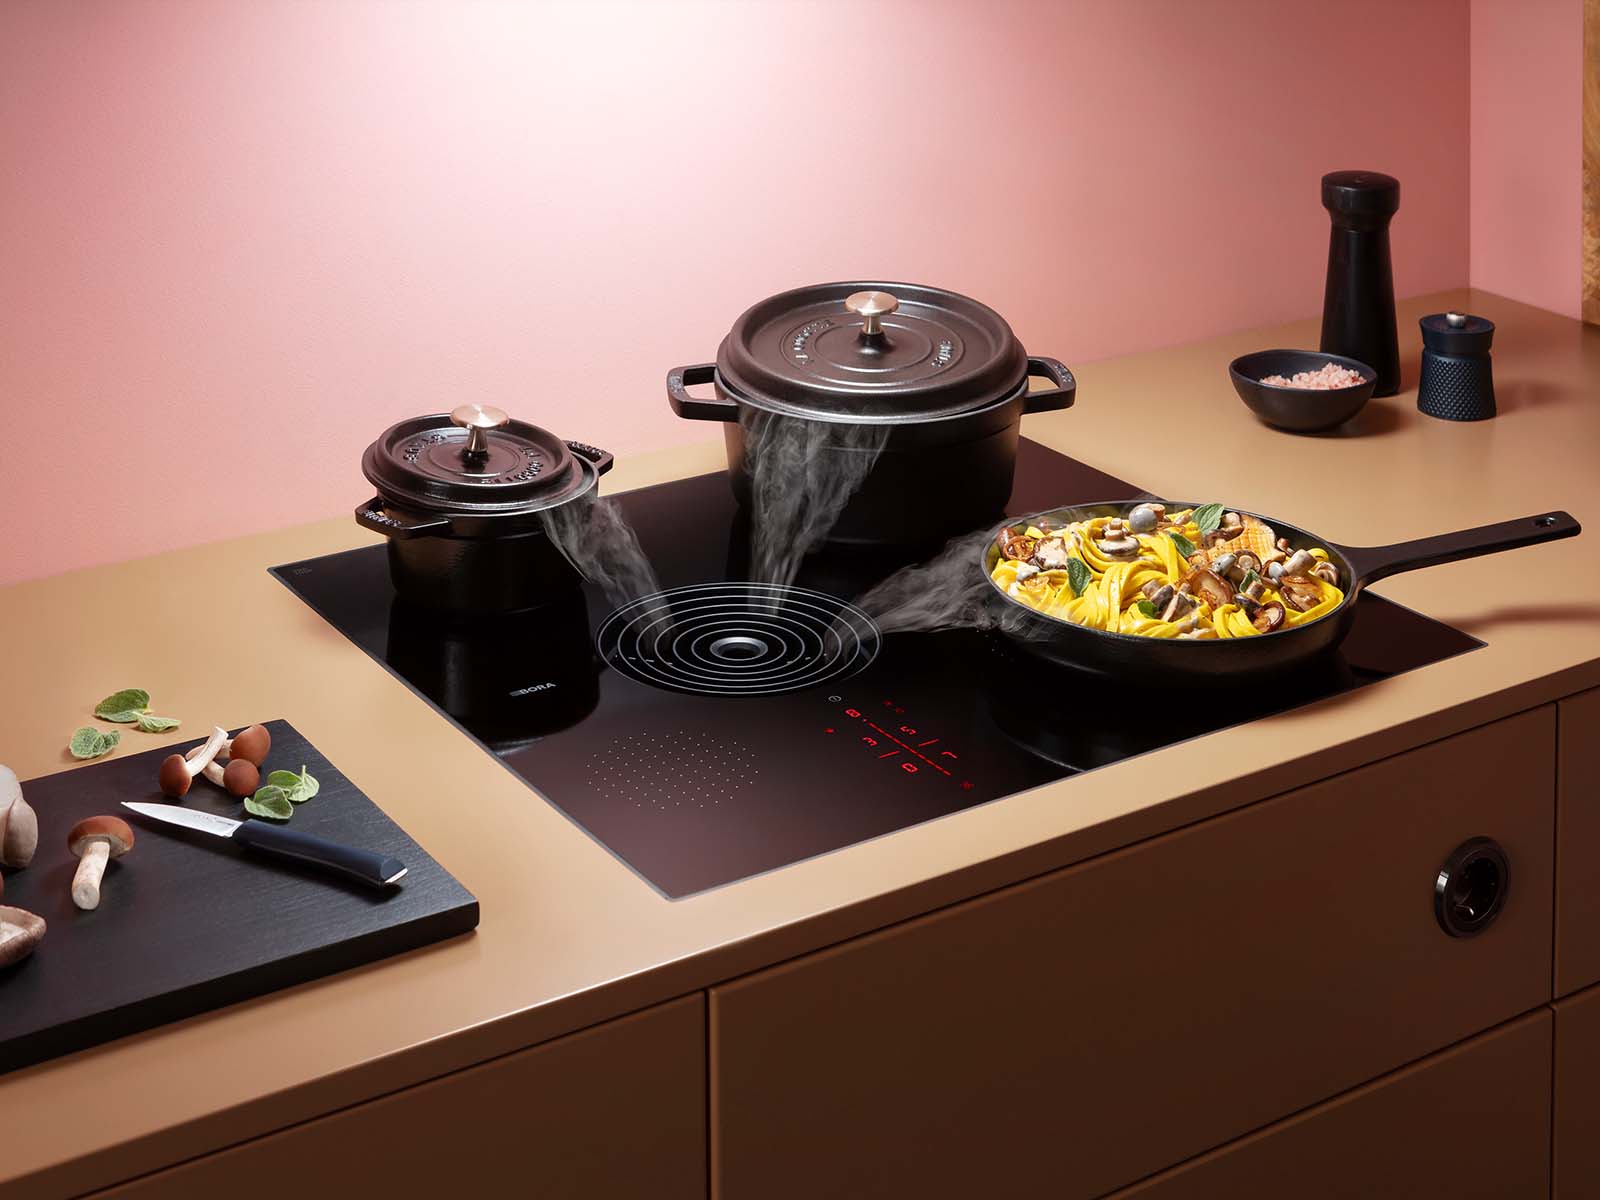 Bora S Pure, Bora's most compact downdraft extracting cooktop ever. Perfect for small spaces and compact kitchens. Sold by Krieder UK